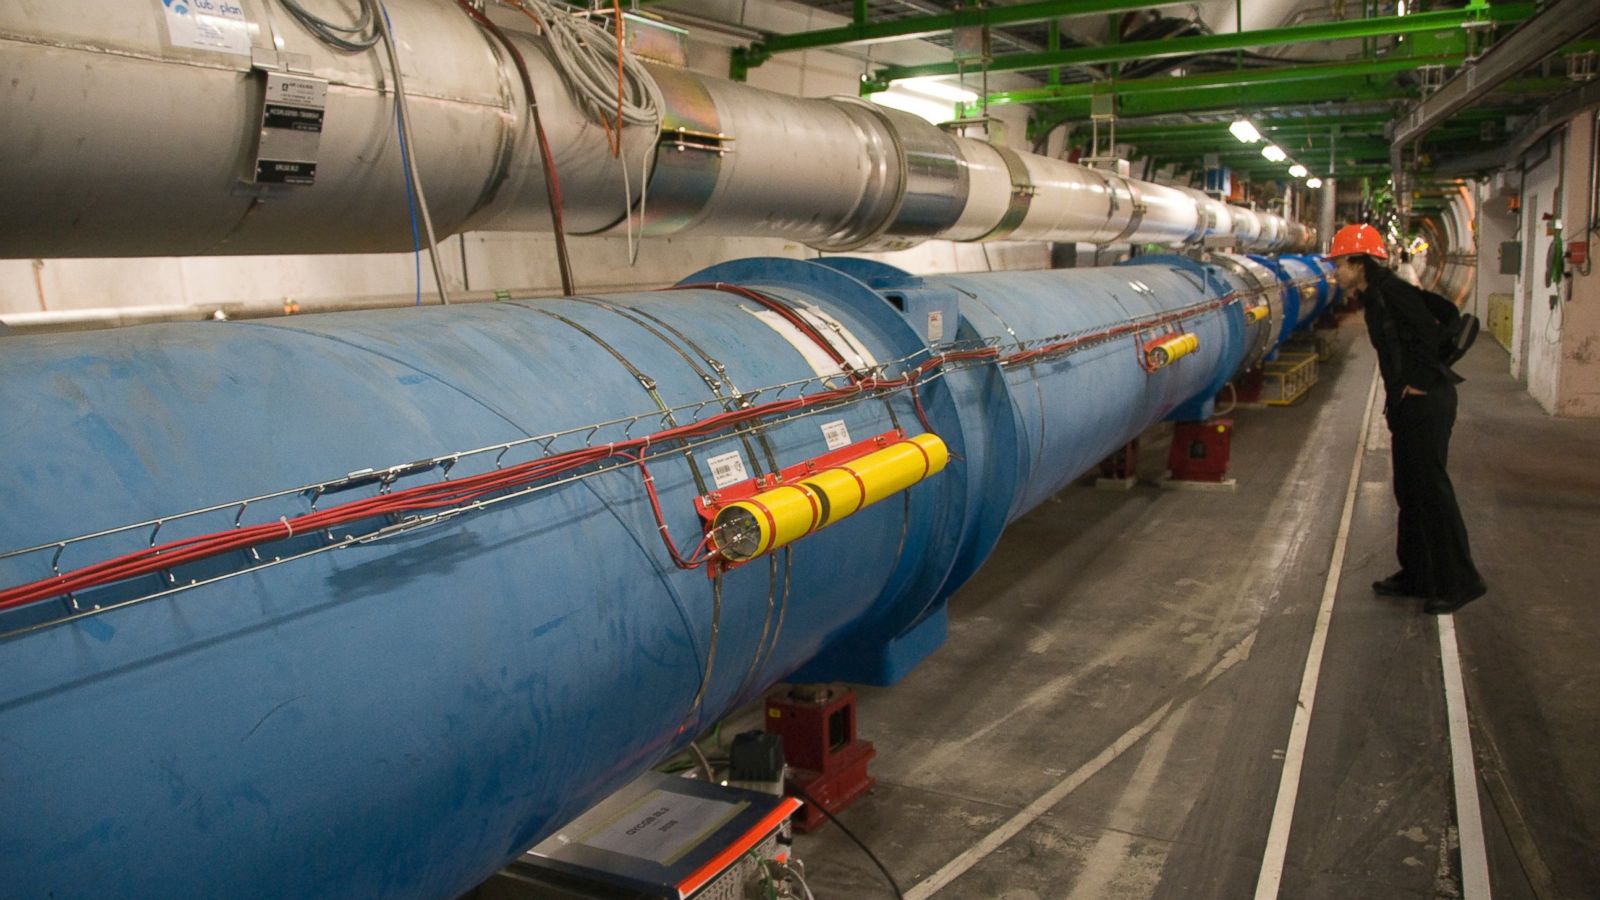 Worlds Largest Atom Smasher, the Large Hadron Collider, Reportedly Shut Down by Rodent